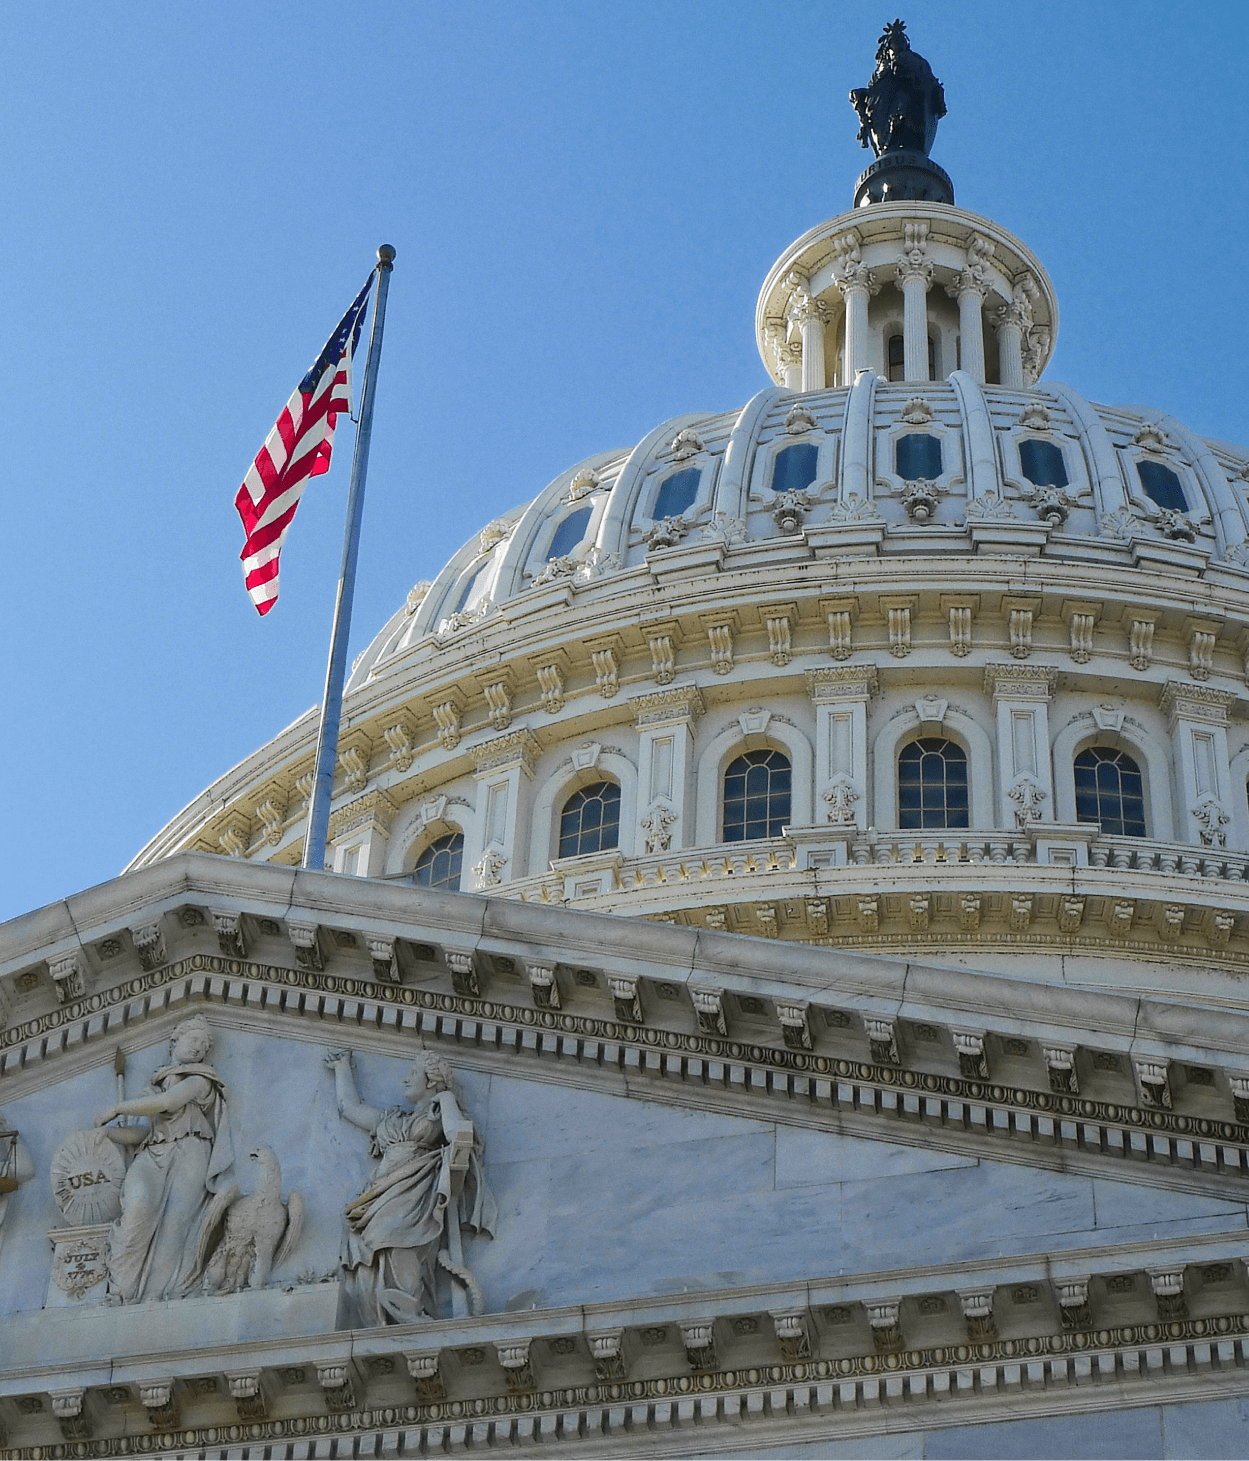 photo of the United States capitol building where the viewer is looking up at the east front facade towards the Rotunda.